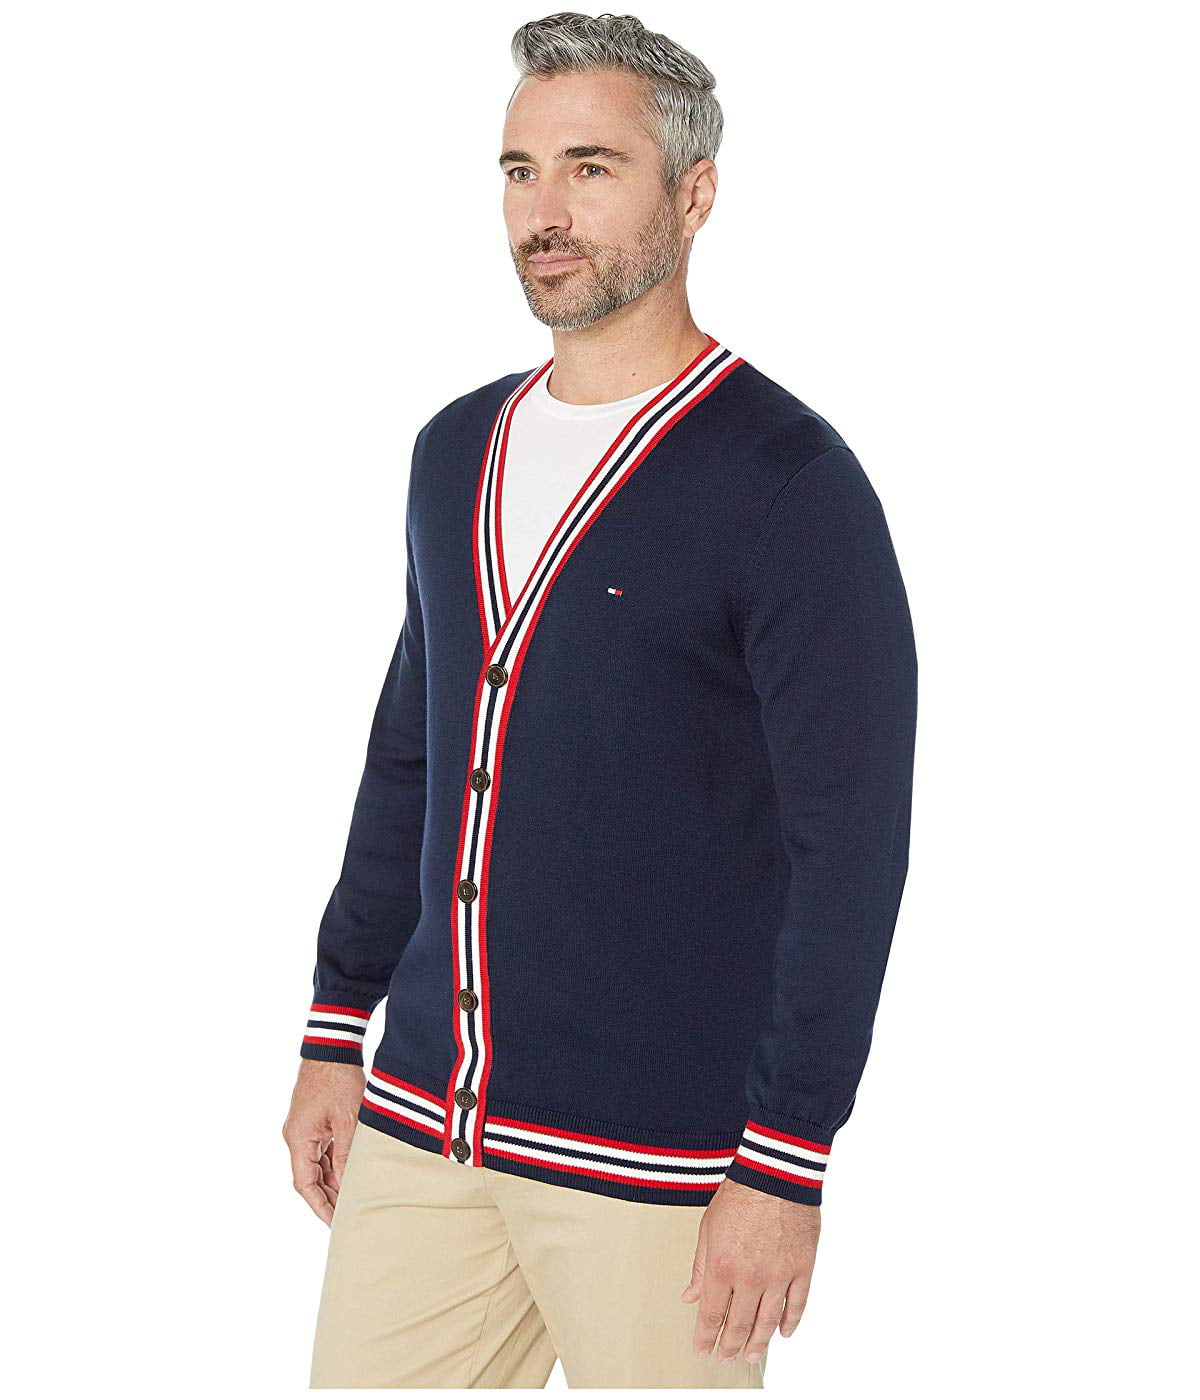 Tommy Hilfiger Cardigan Sweater with Magnetic Buttons Navy Blazer - Walmart.com